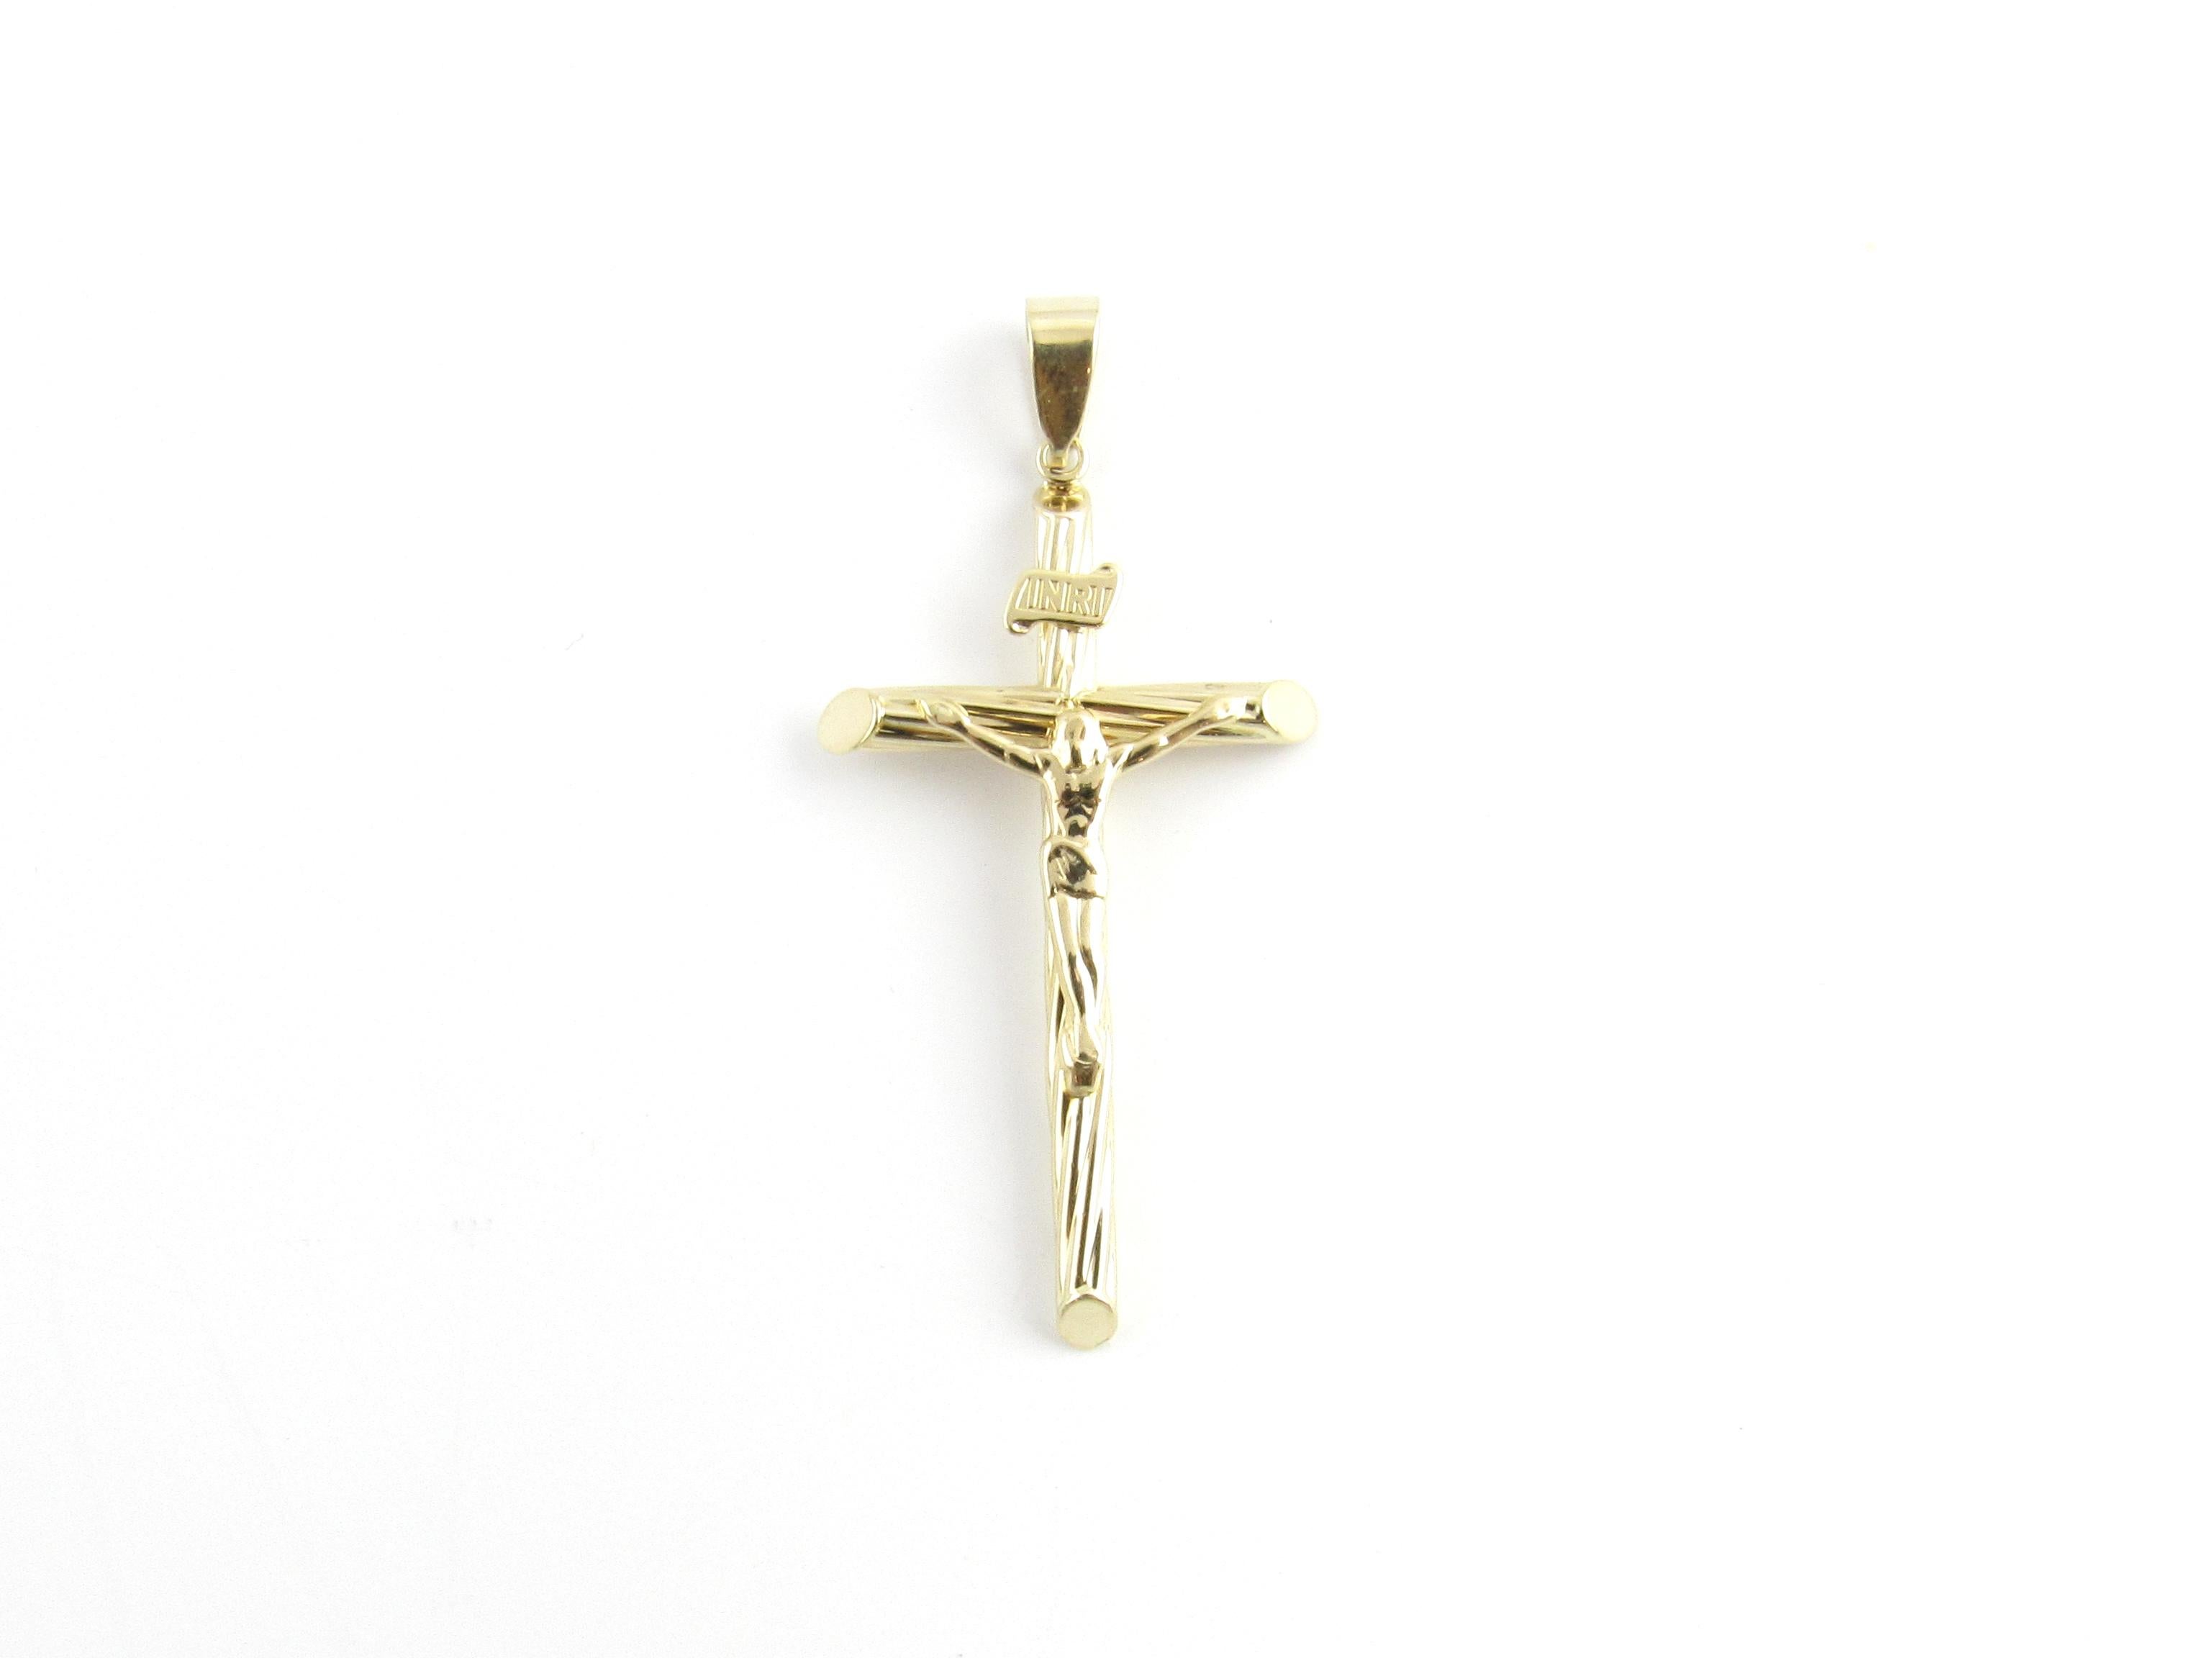 Vintage 14 Karat Yellow Gold Crucifix Pendant

This elegant pendant features a lovely crucifix crafted in beautifully detailed 14K yellow gold.

Size: 45 mm x 25 mm

Weight: 1.1 dwt. / 1.8 gr.

Stamped: 14K

Very good condition, professionally